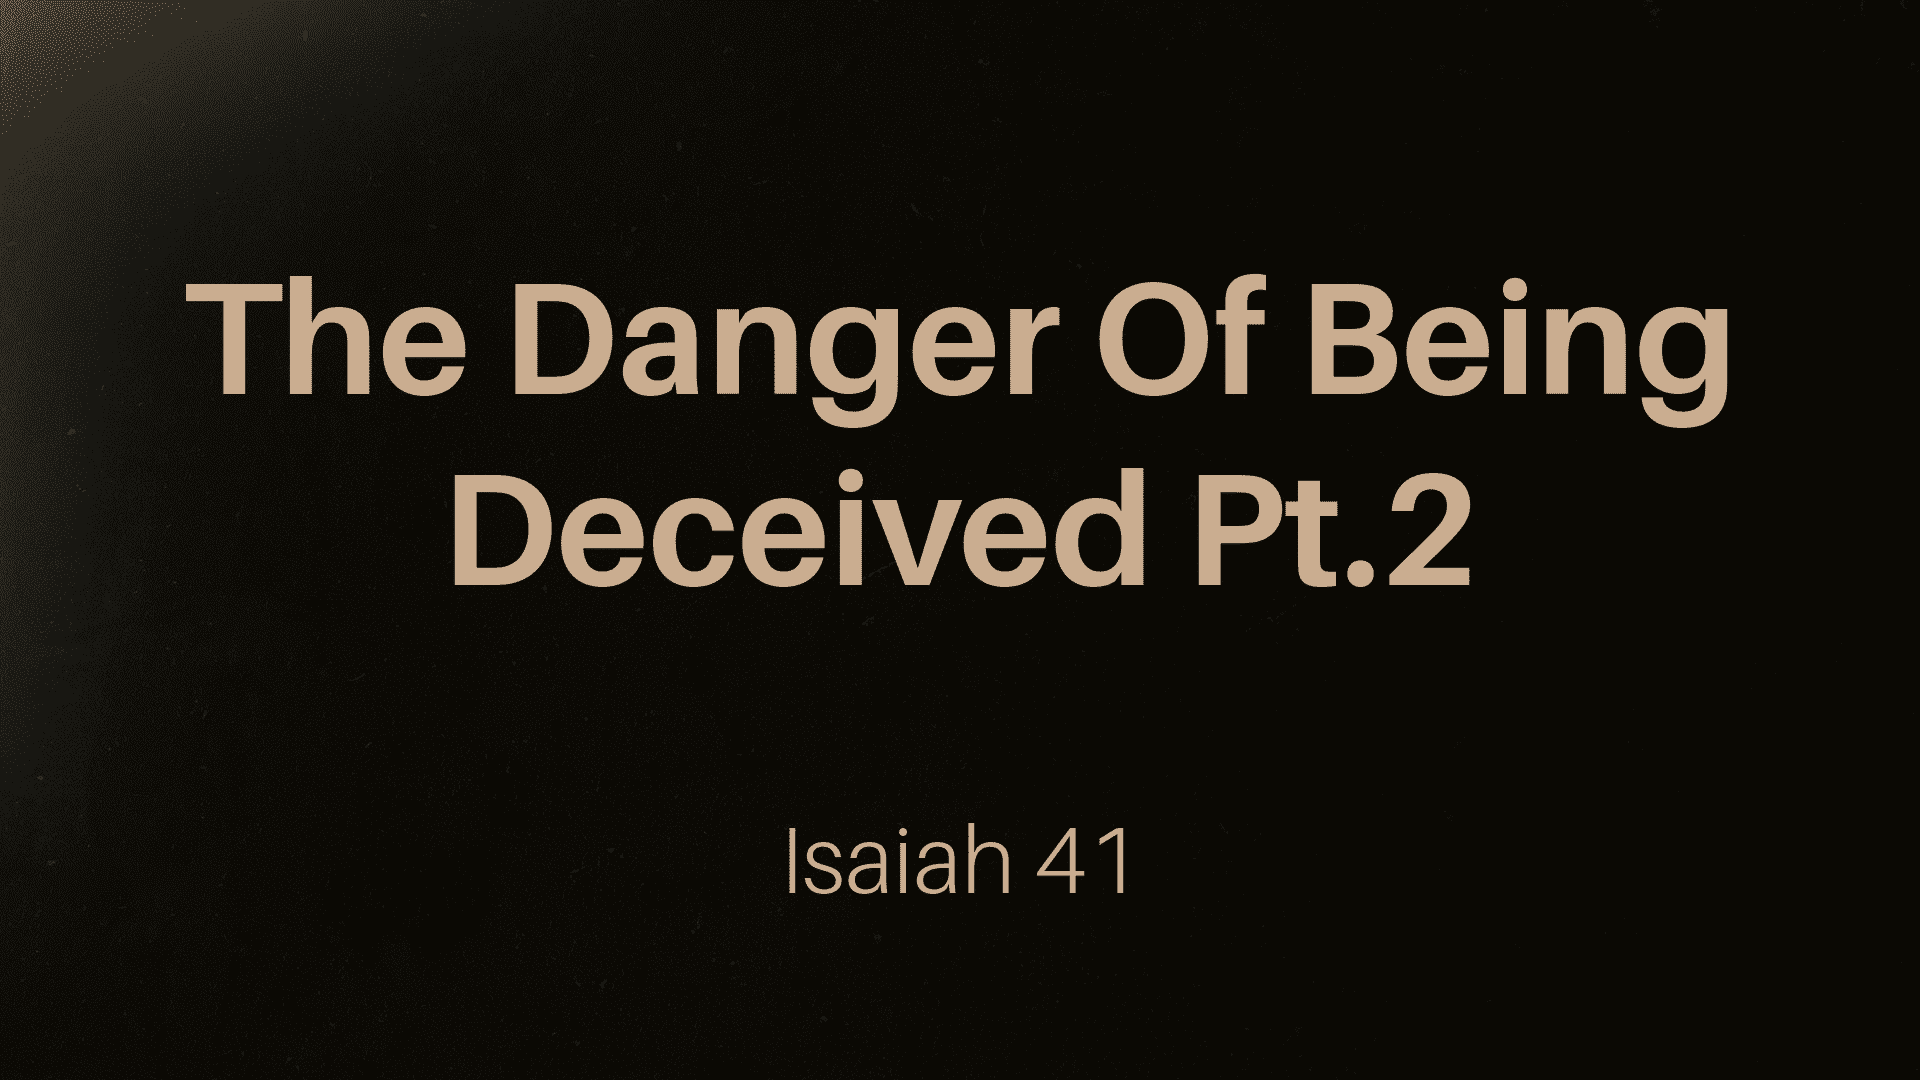 The Danger Of Being Deceived Pt.2